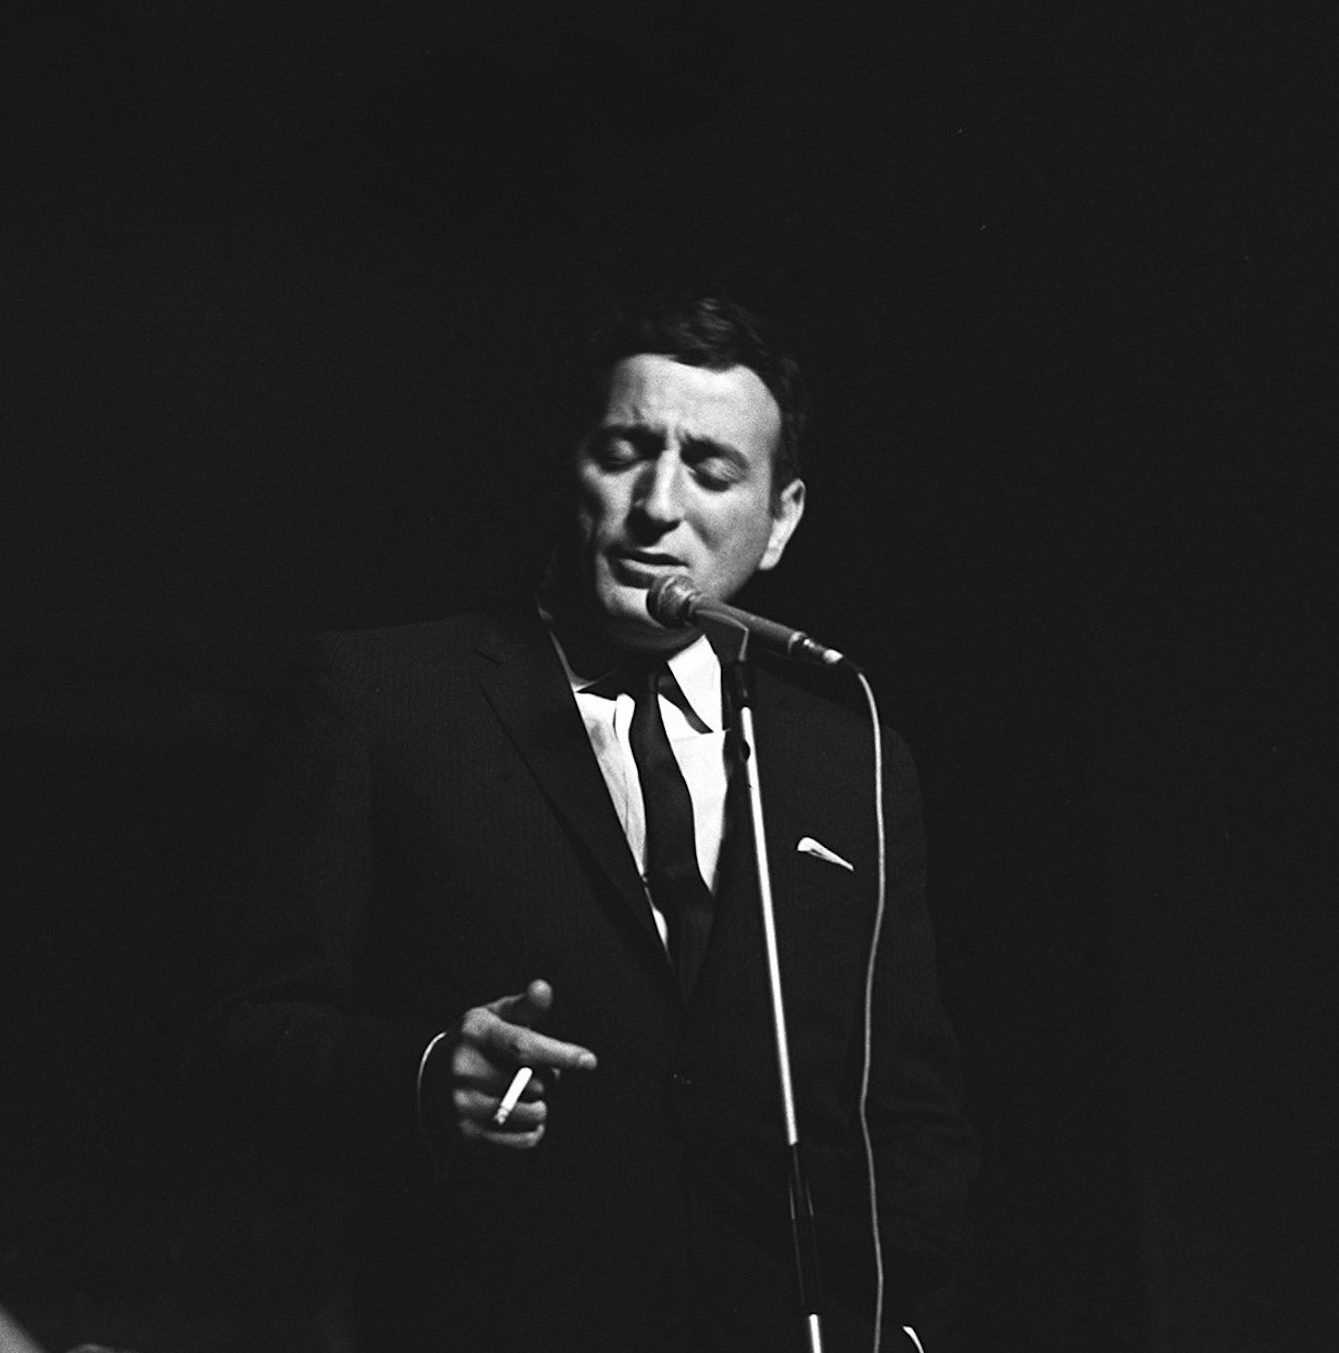 Tony Bennett Through the Years: The Singer’s Life in Photos | Us Weekly